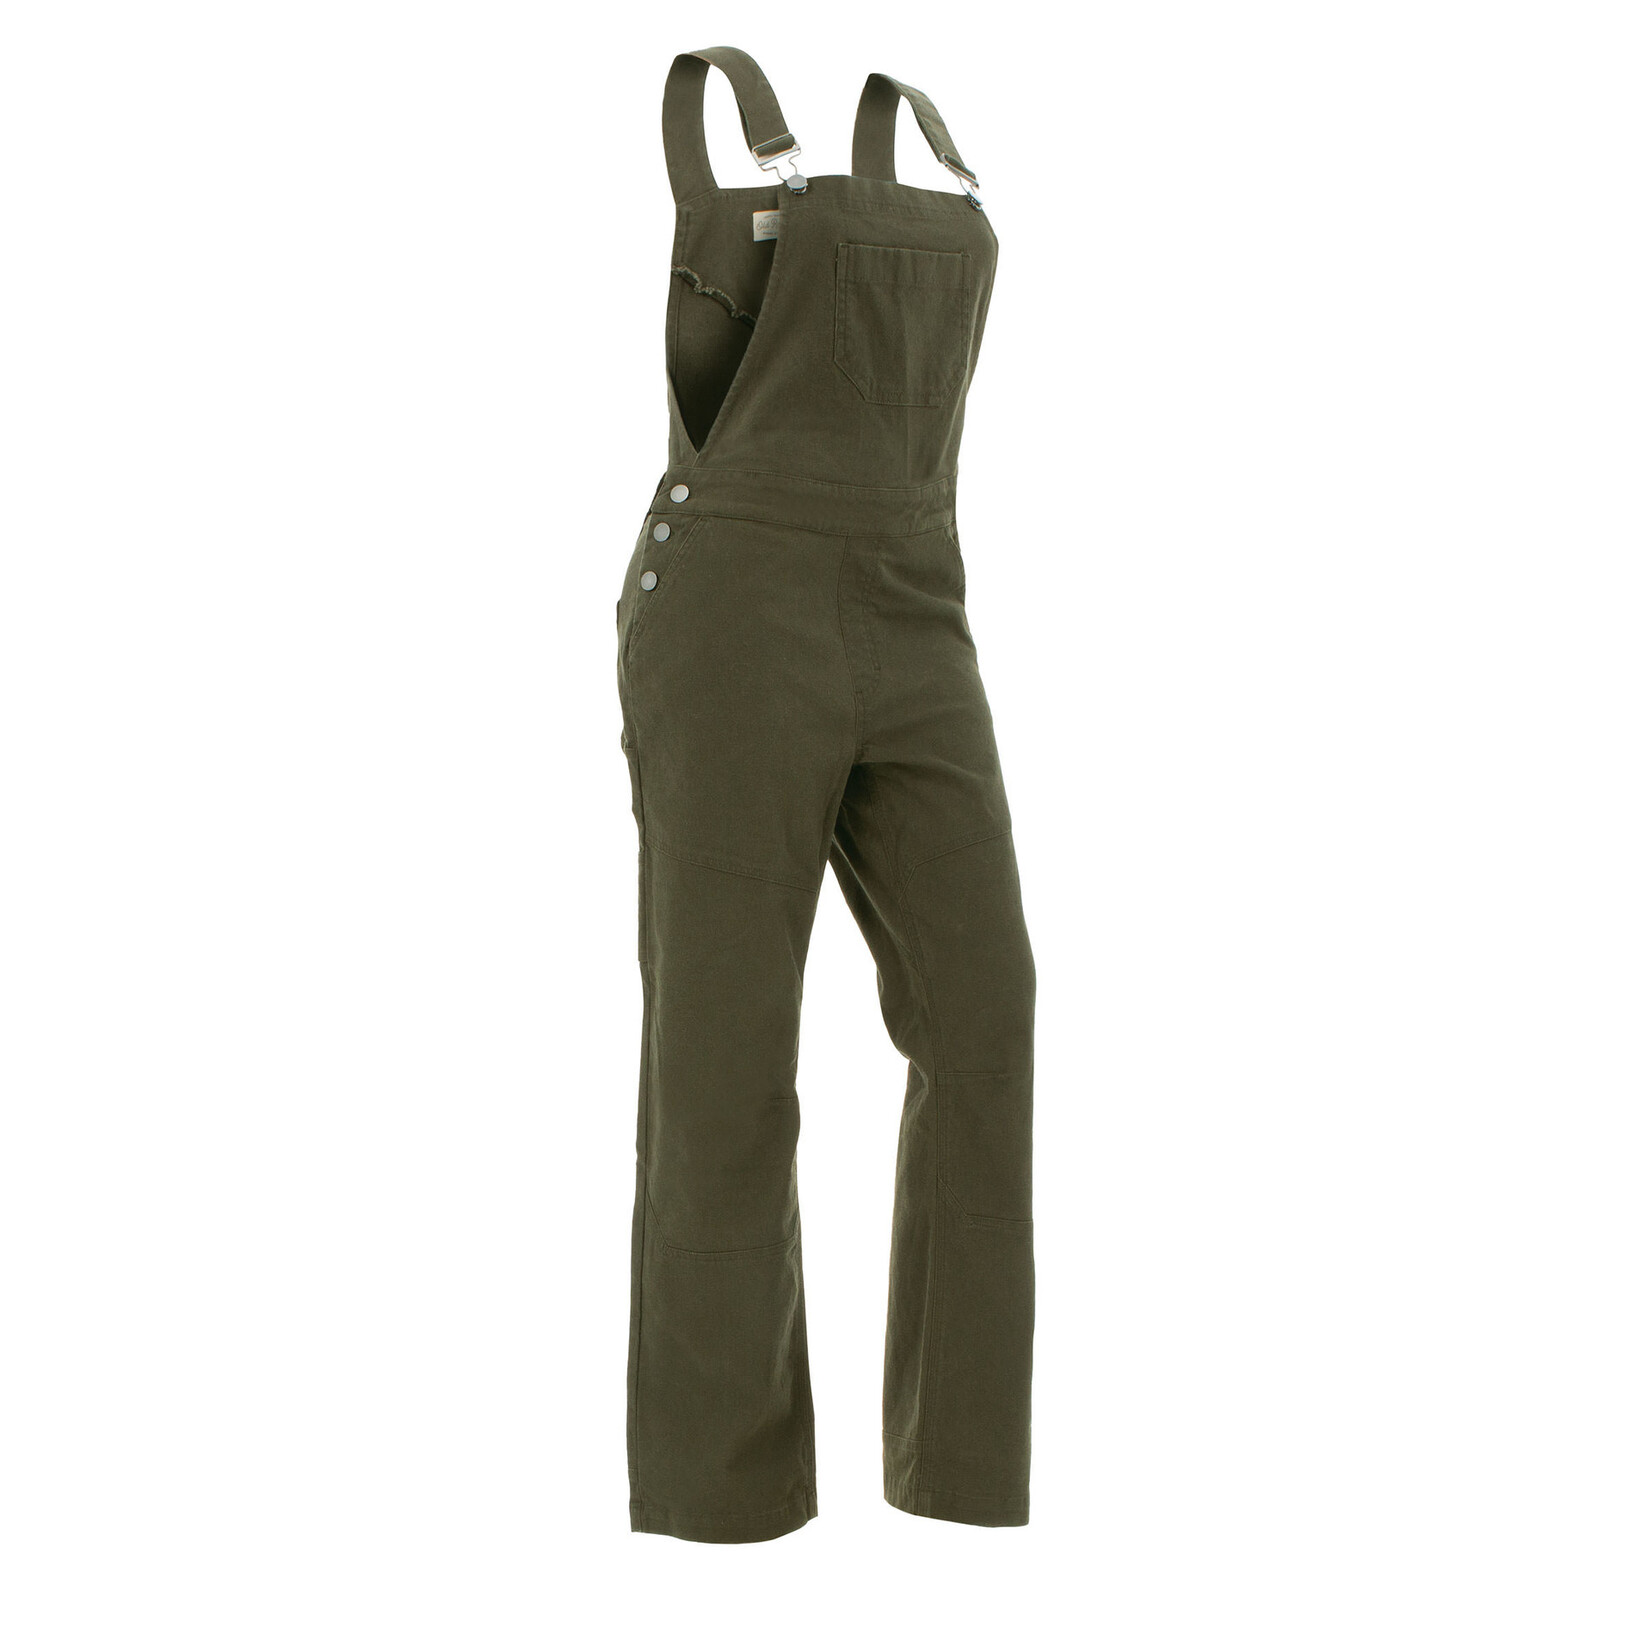 Old Ranch Brands Artemis Overall